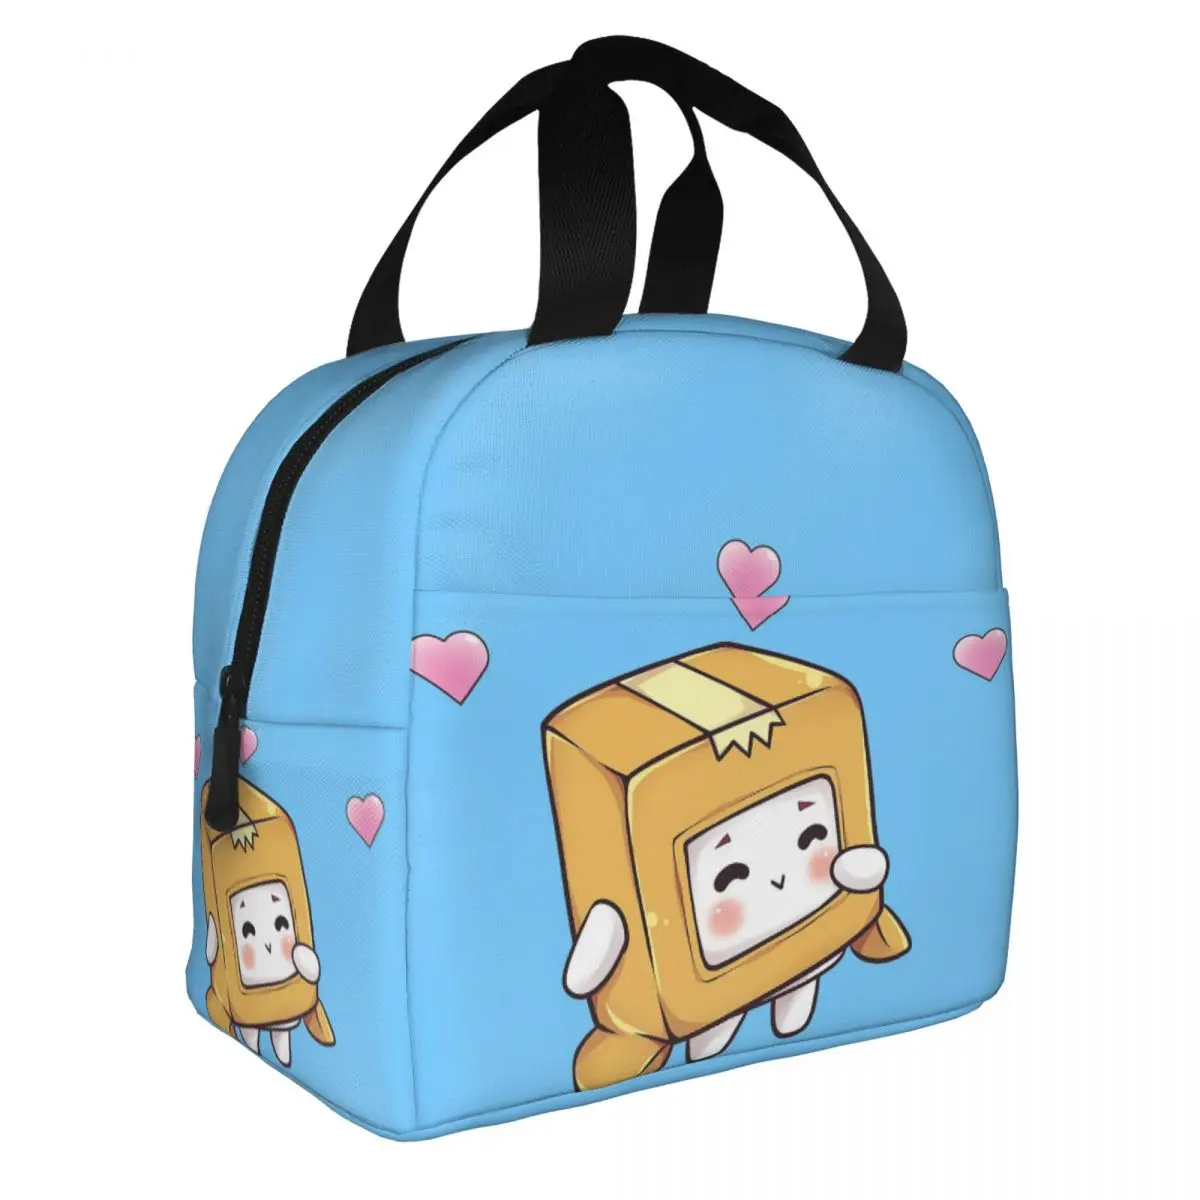 

Lankybox Boxy Insulated Lunch Bags Thermal Bag Lunch Container Kawaii Cartoon Portable Tote Lunch Box Bento Pouch Office Travel